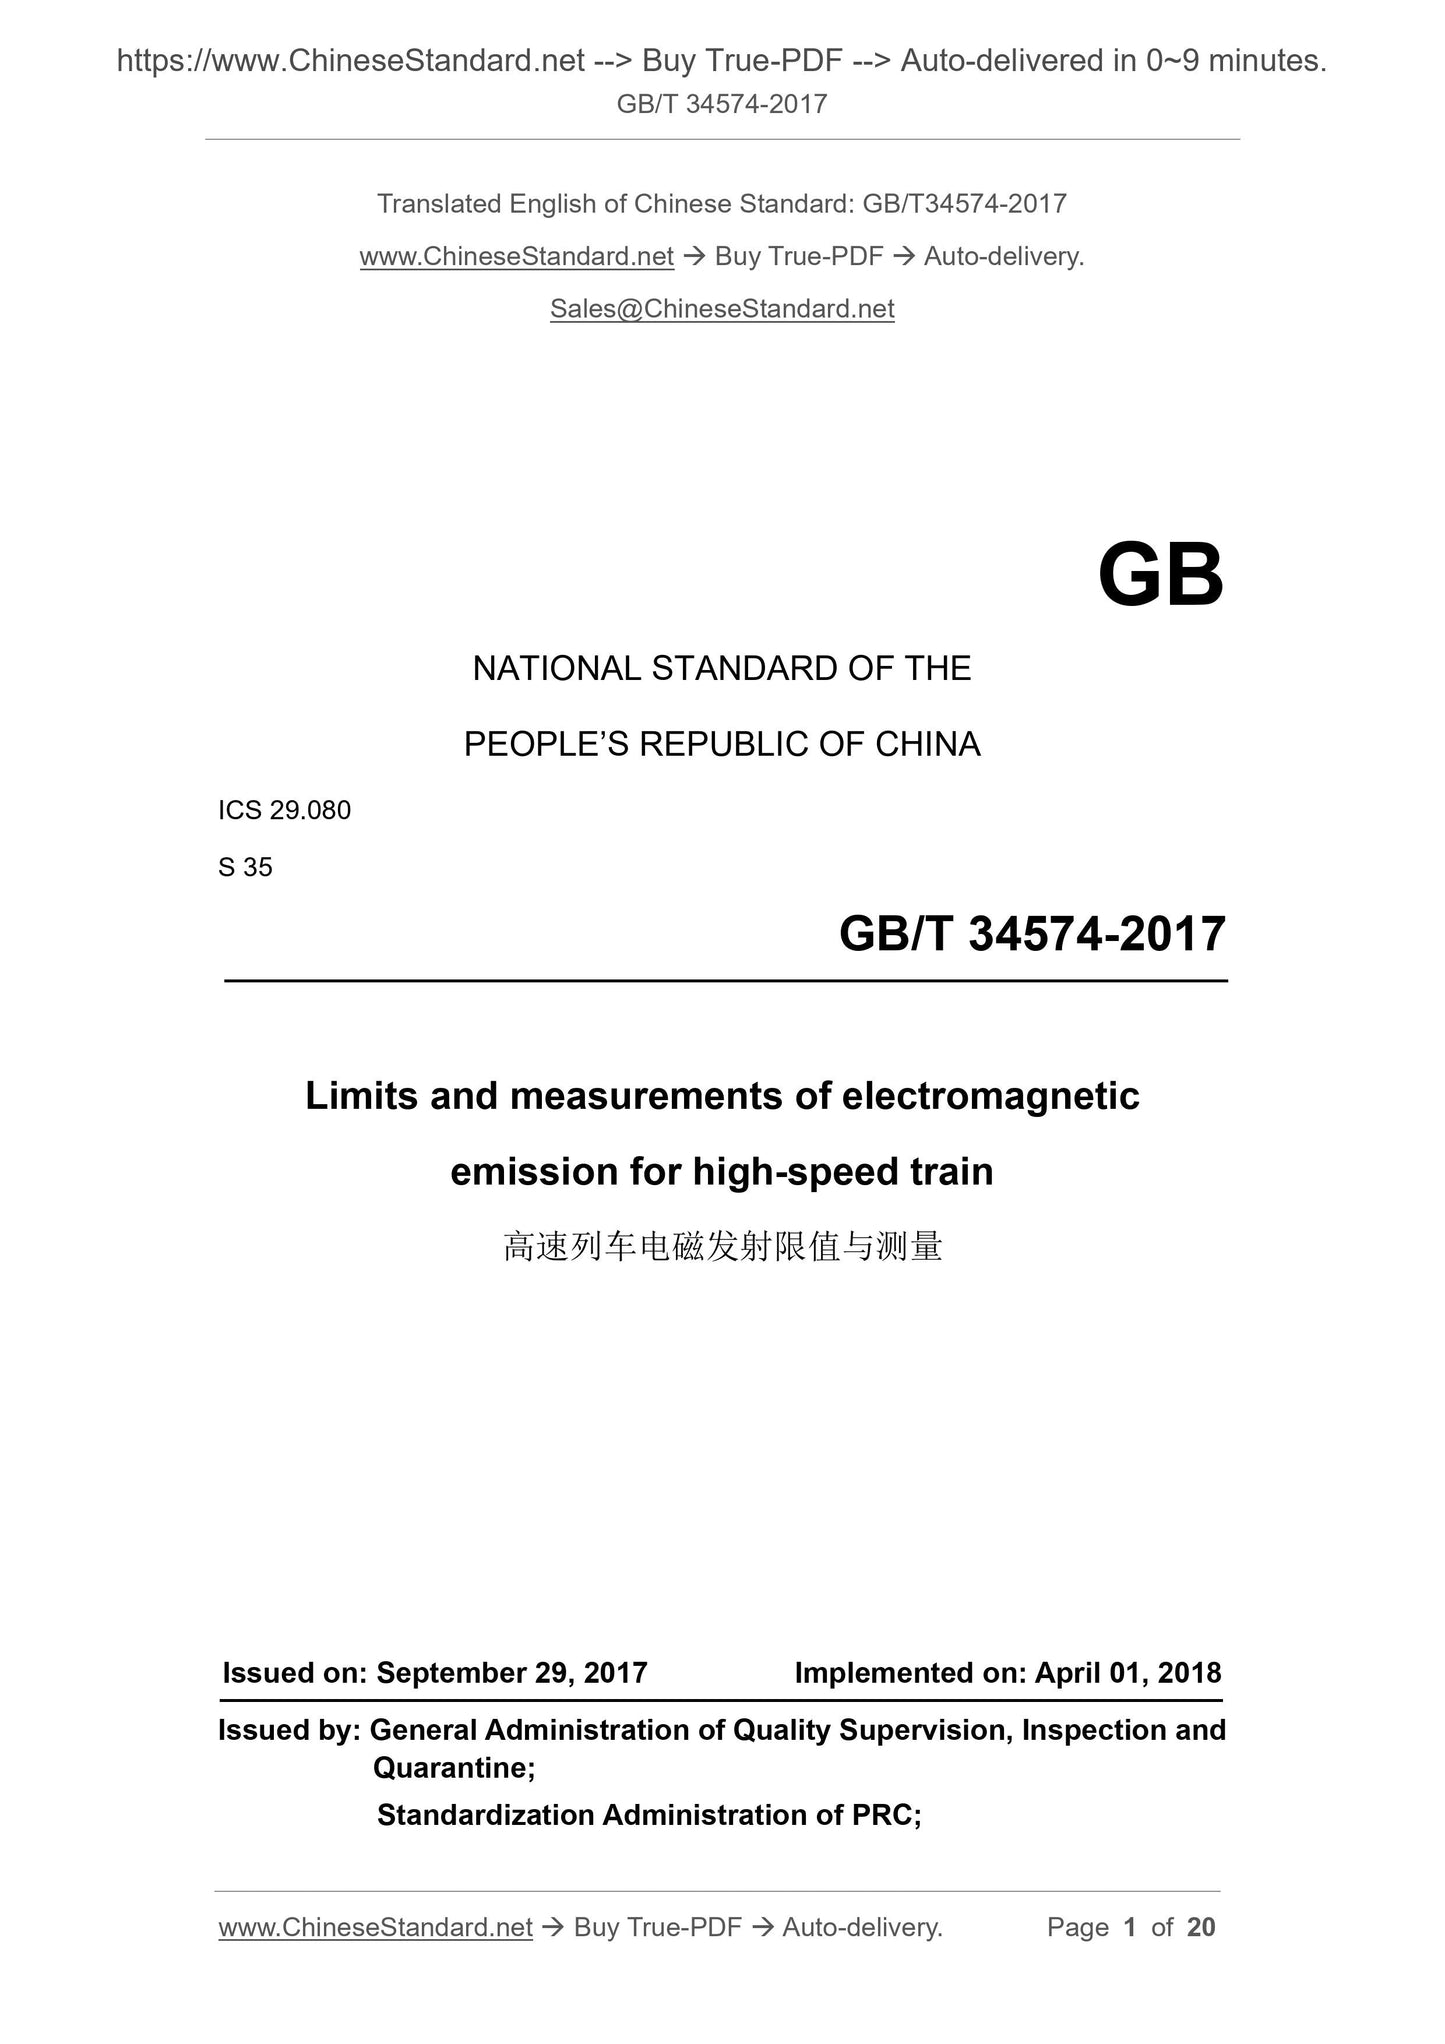 GB/T 34574-2017 Page 1